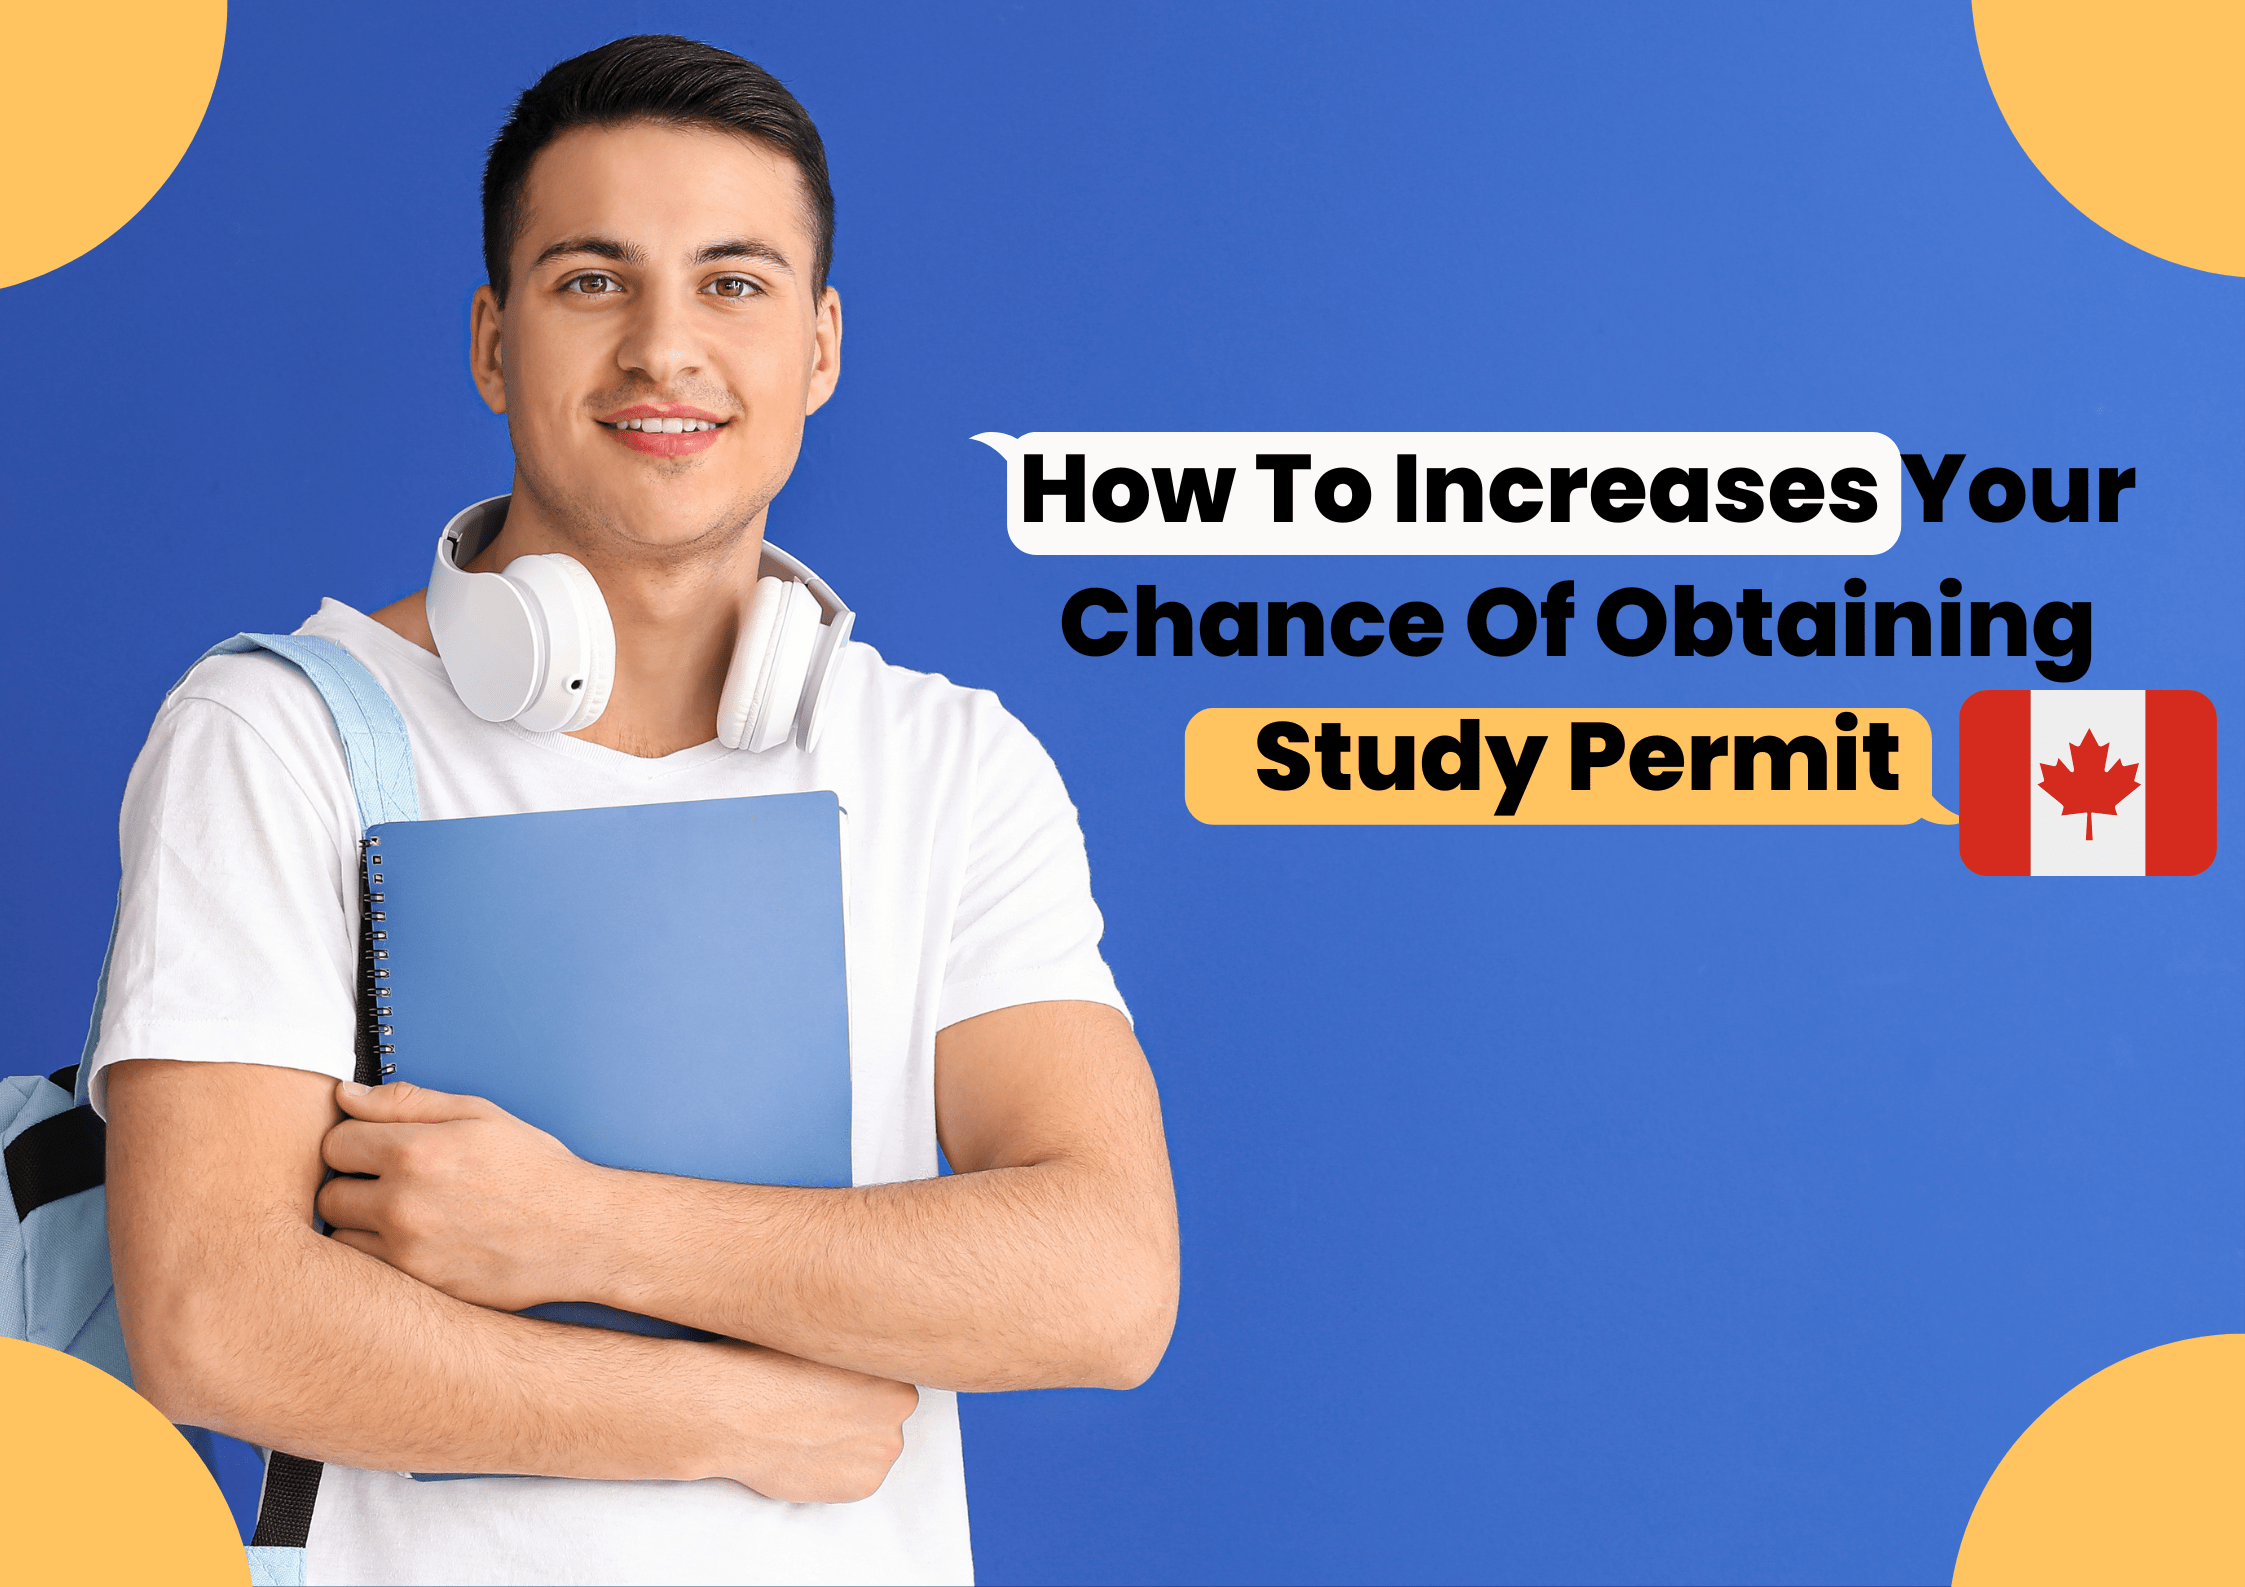 How To Increases Your Chance Of Obtaining Study Permit